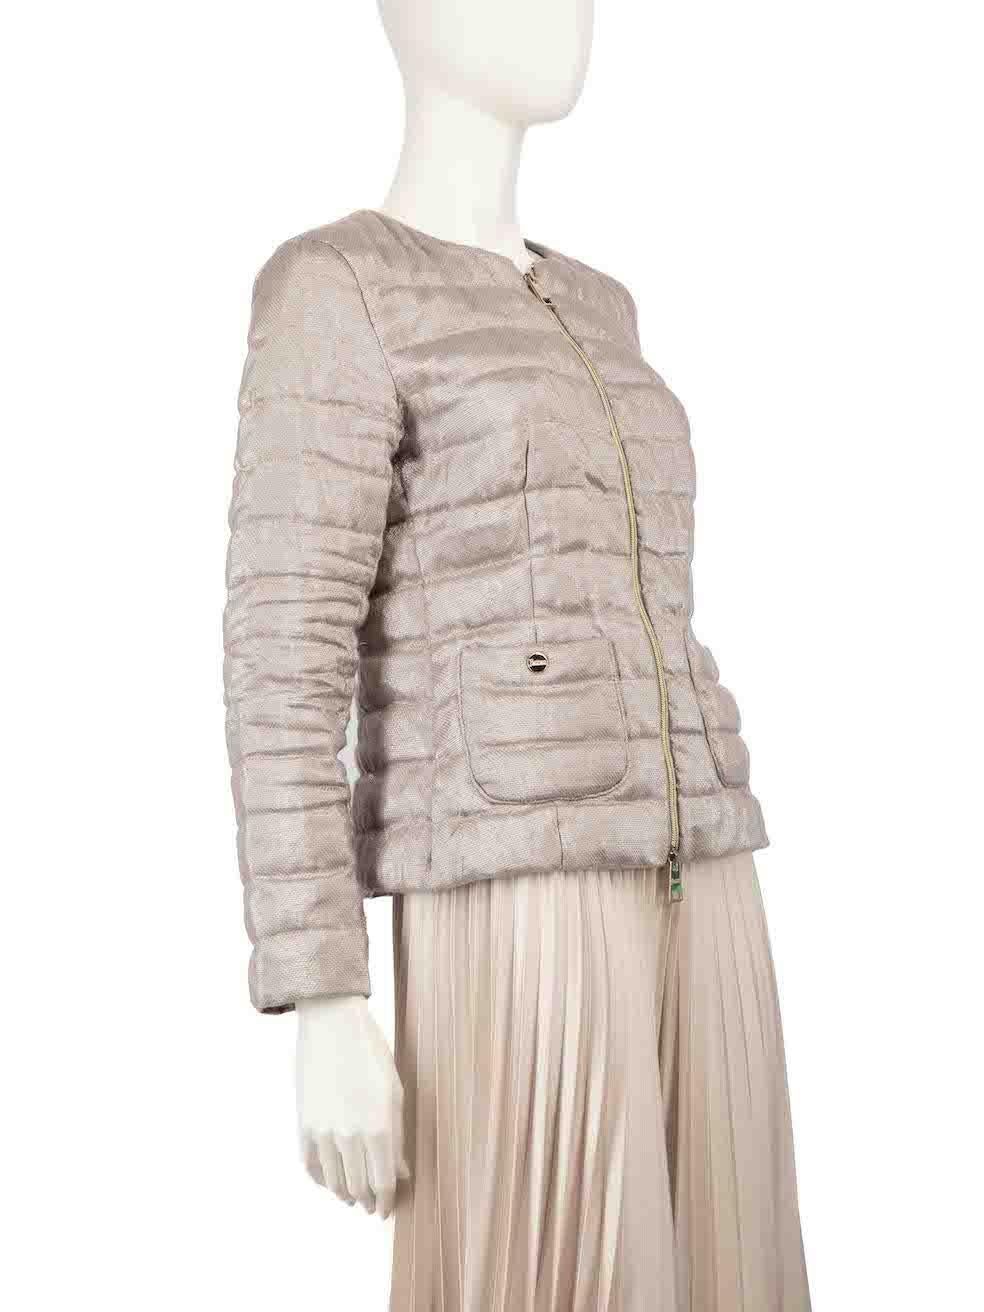 CONDITION is Very good. Minimal wear to the jacket is evident. Minimal pull to thread on the bottom sides of this used Herno designer resale item.
 
 
 
 Details
 
 
 Beige
 
 Linen
 
 Puffer jacket
 
 Metallic accent
 
 Front double zip closure
 
